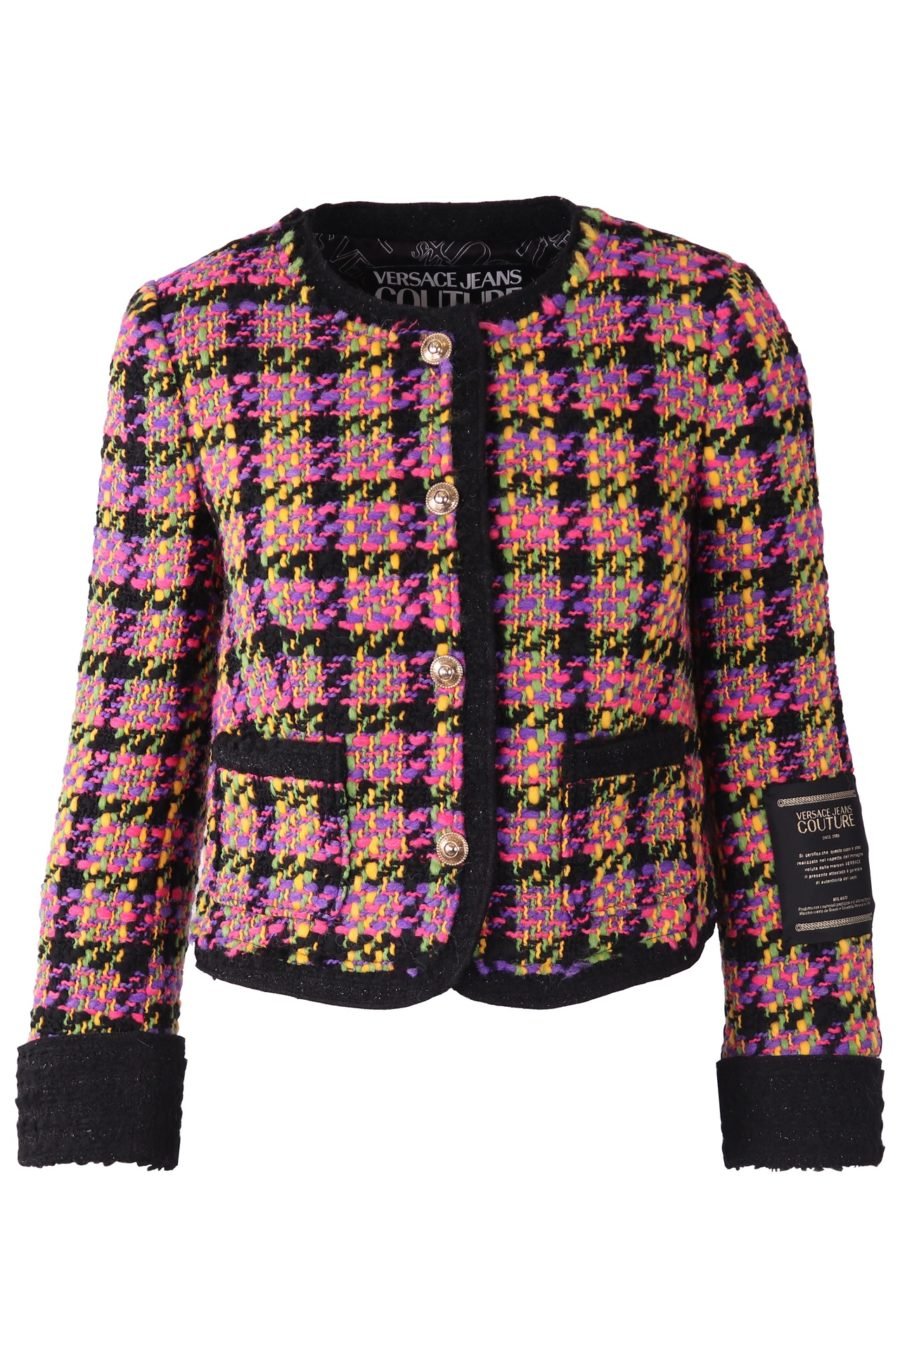 Versace Jeans Couture Short tweed jacket with gold buttons - 5b702c90aecd737e2d79dbc4a5b335e8a5a3ec4b